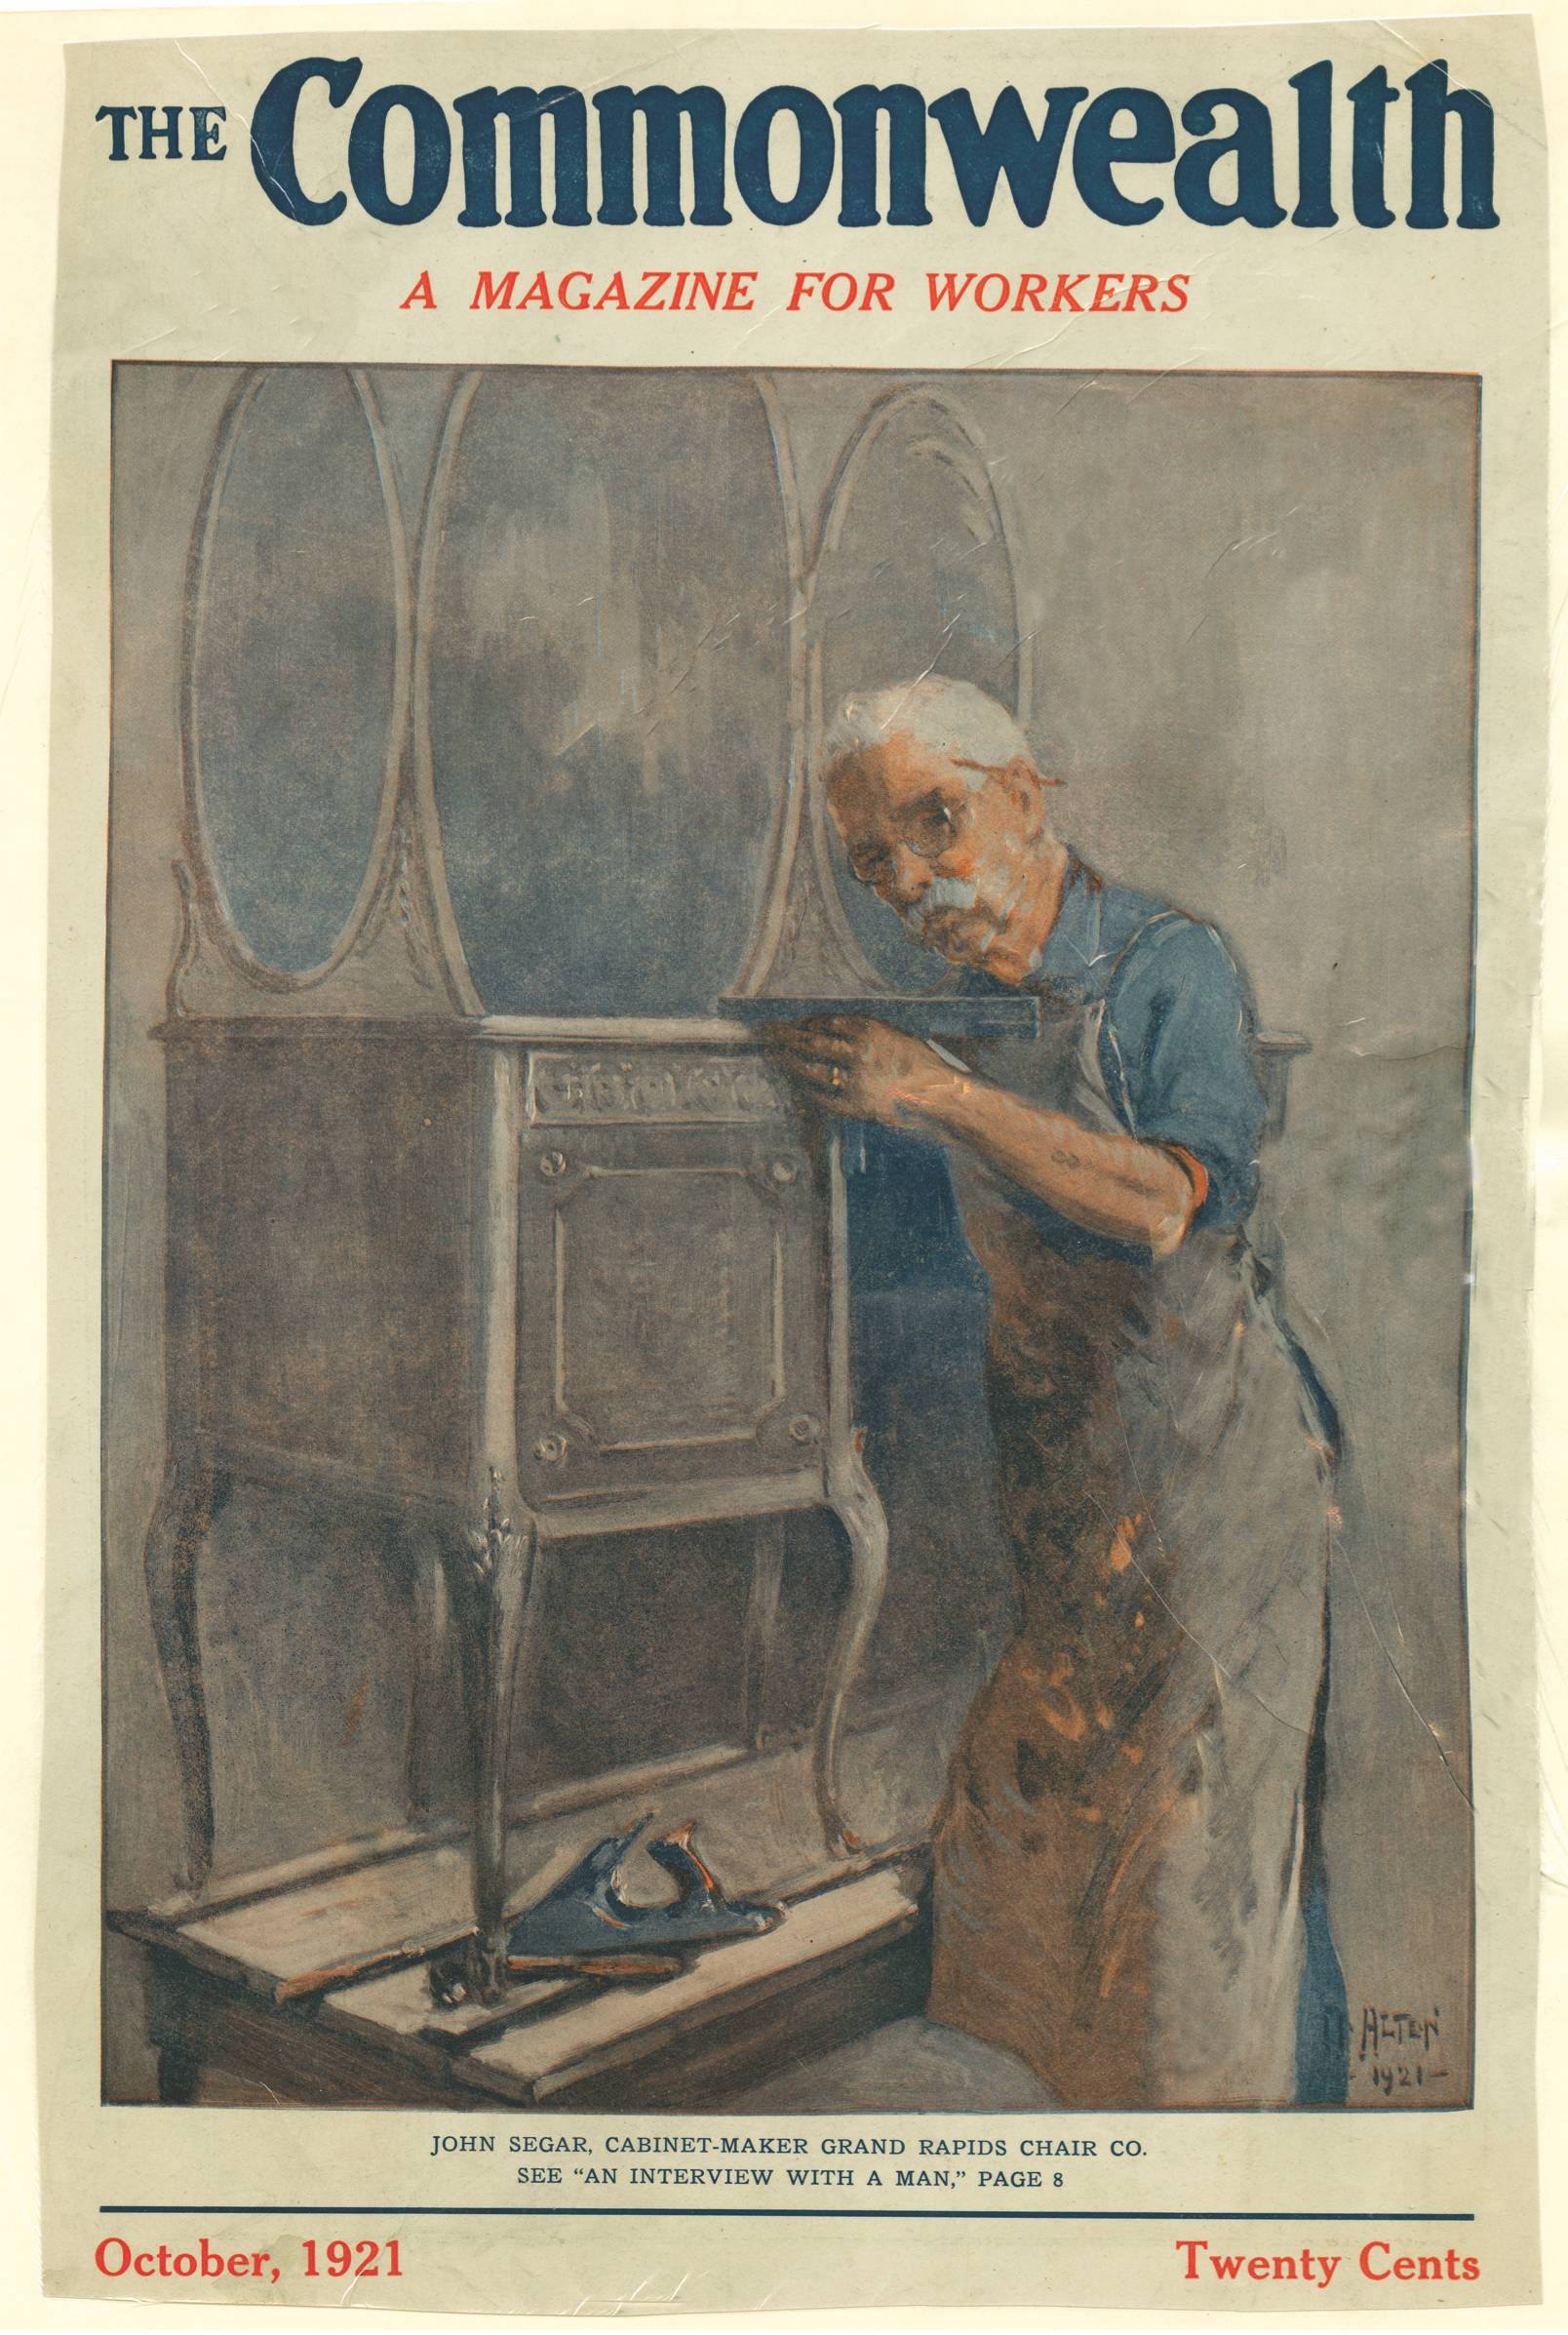 Magazine cover of Commonwealth published in October, 1921 depicting a workman making a vanity desk.